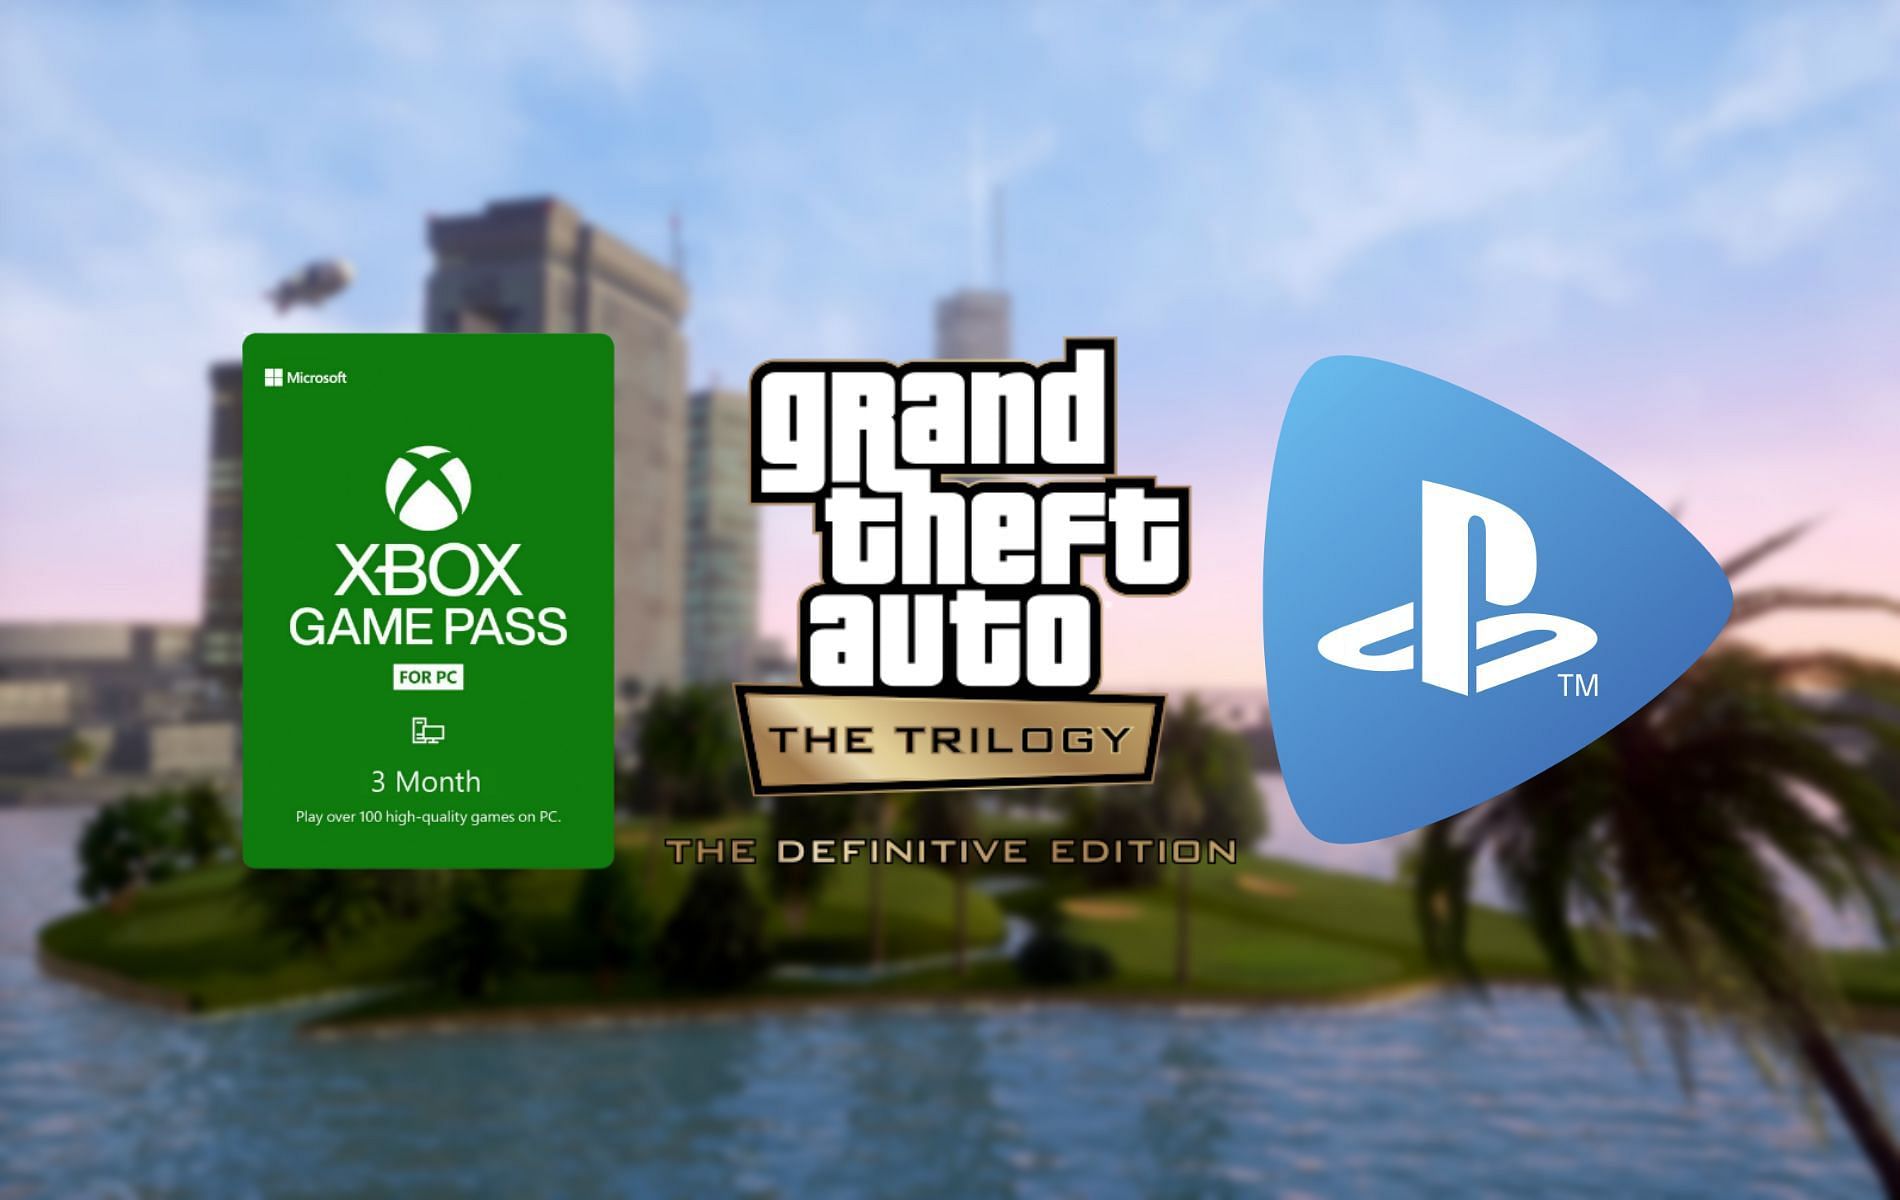 When does GTA Trilogy Definitive Edition come out on Xbox Game Pass and